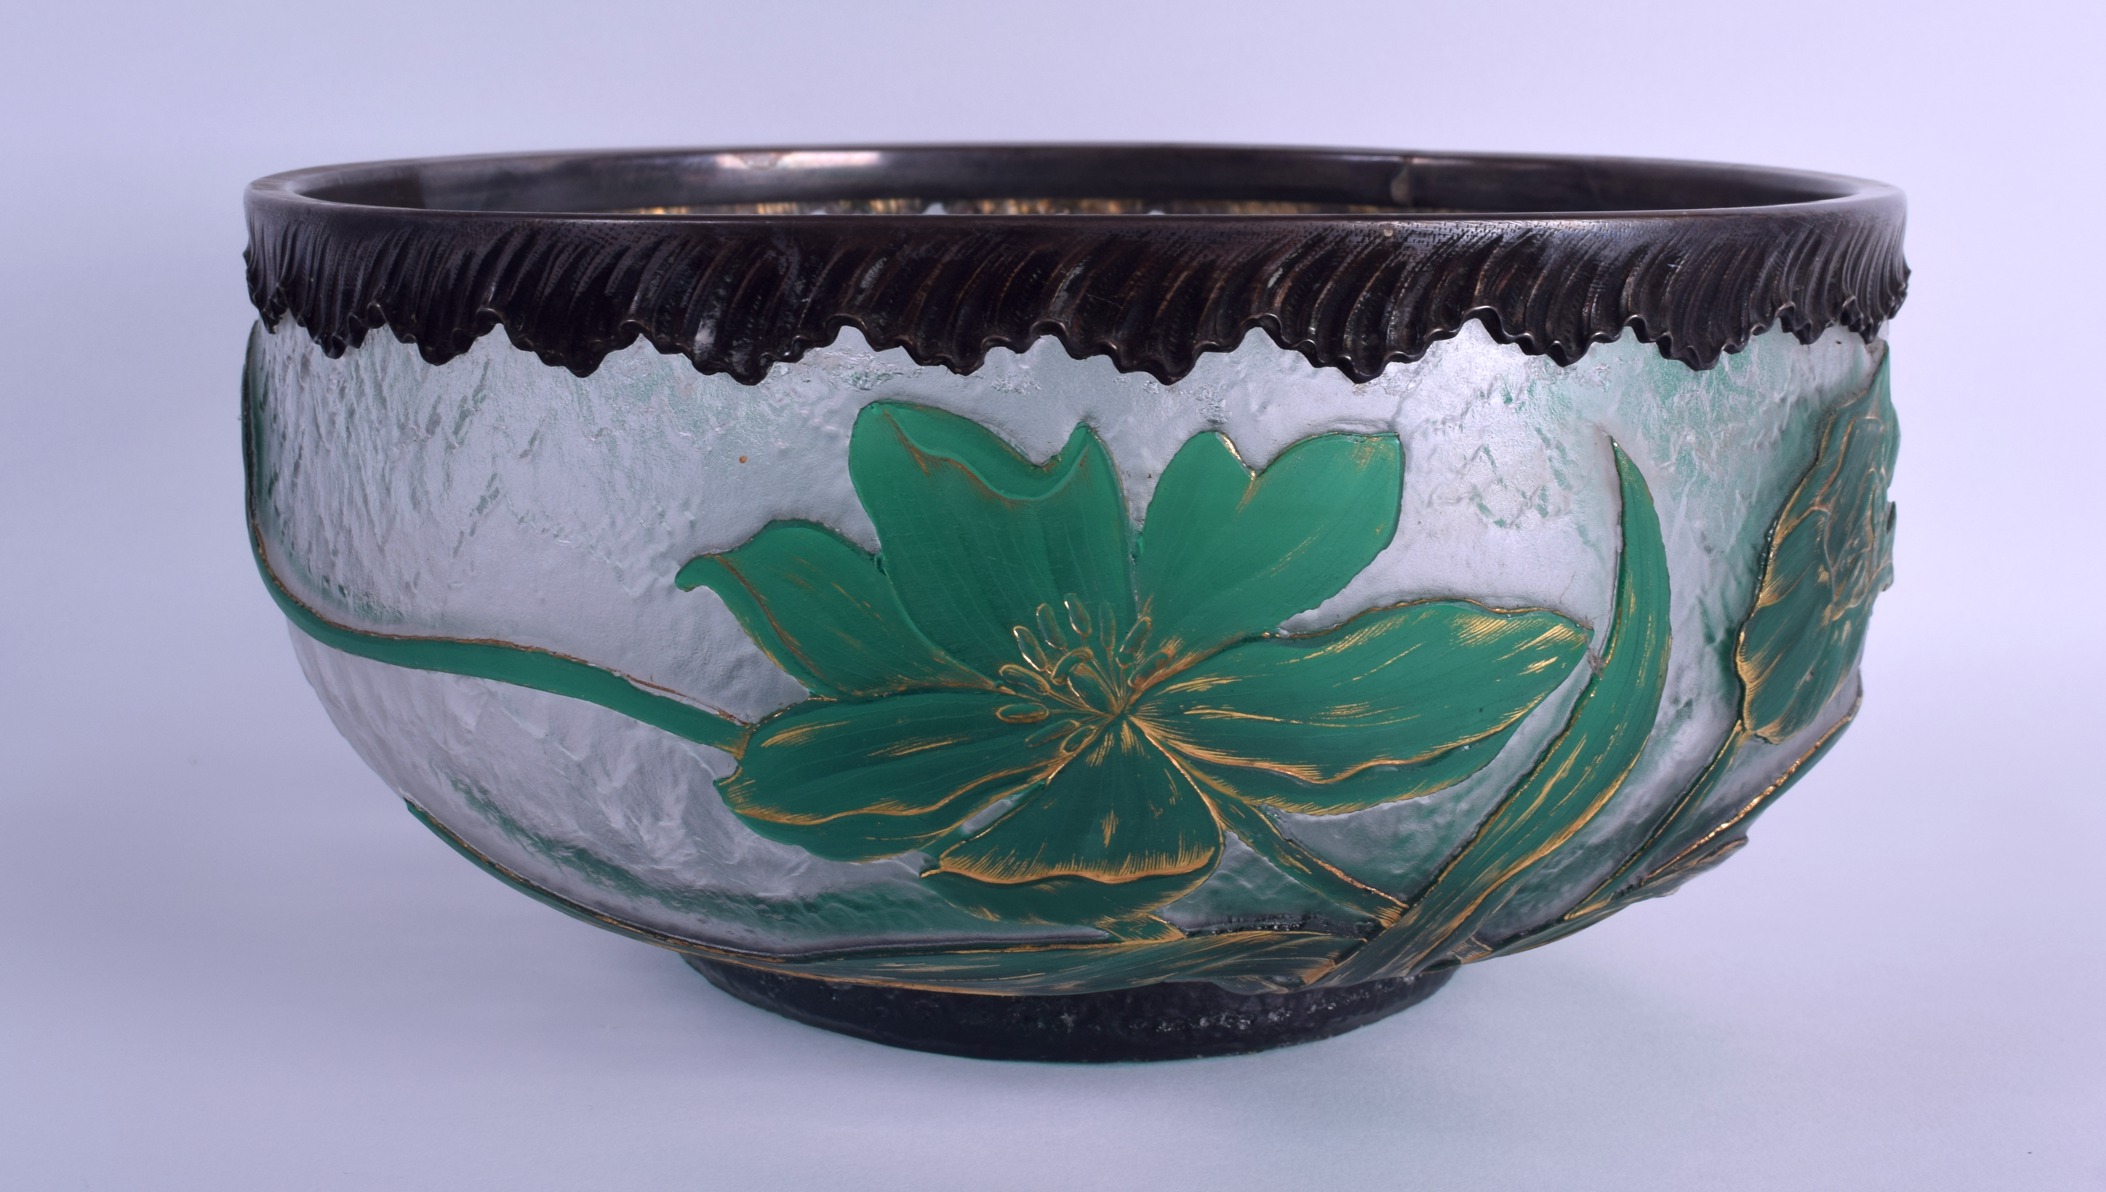 A LARGE FRENCH ART NOUVEAU DAUM NANCY CAMEO GLASS BOWL with acanthus capped overlay to the rim. 25